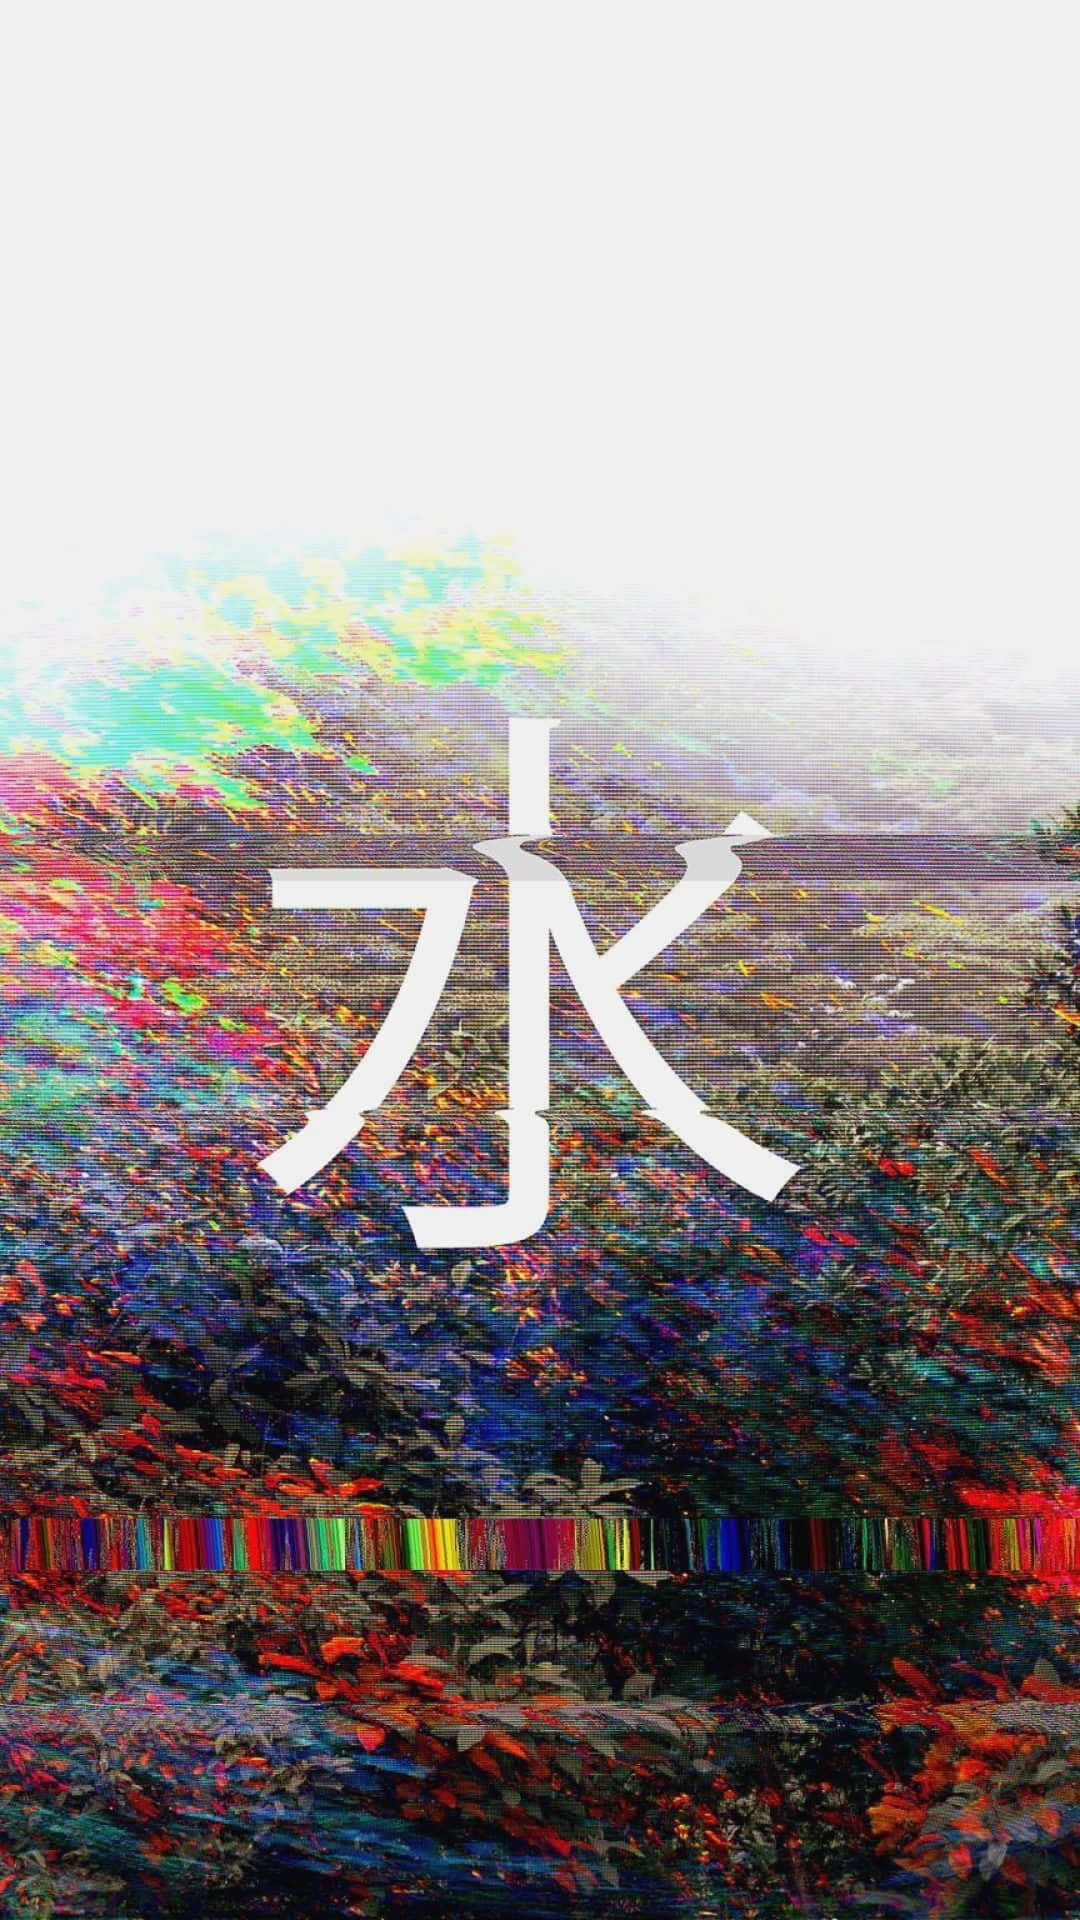 "Experience the beauty and mystery of Japan with a Dark Japanese Iphone" Wallpaper